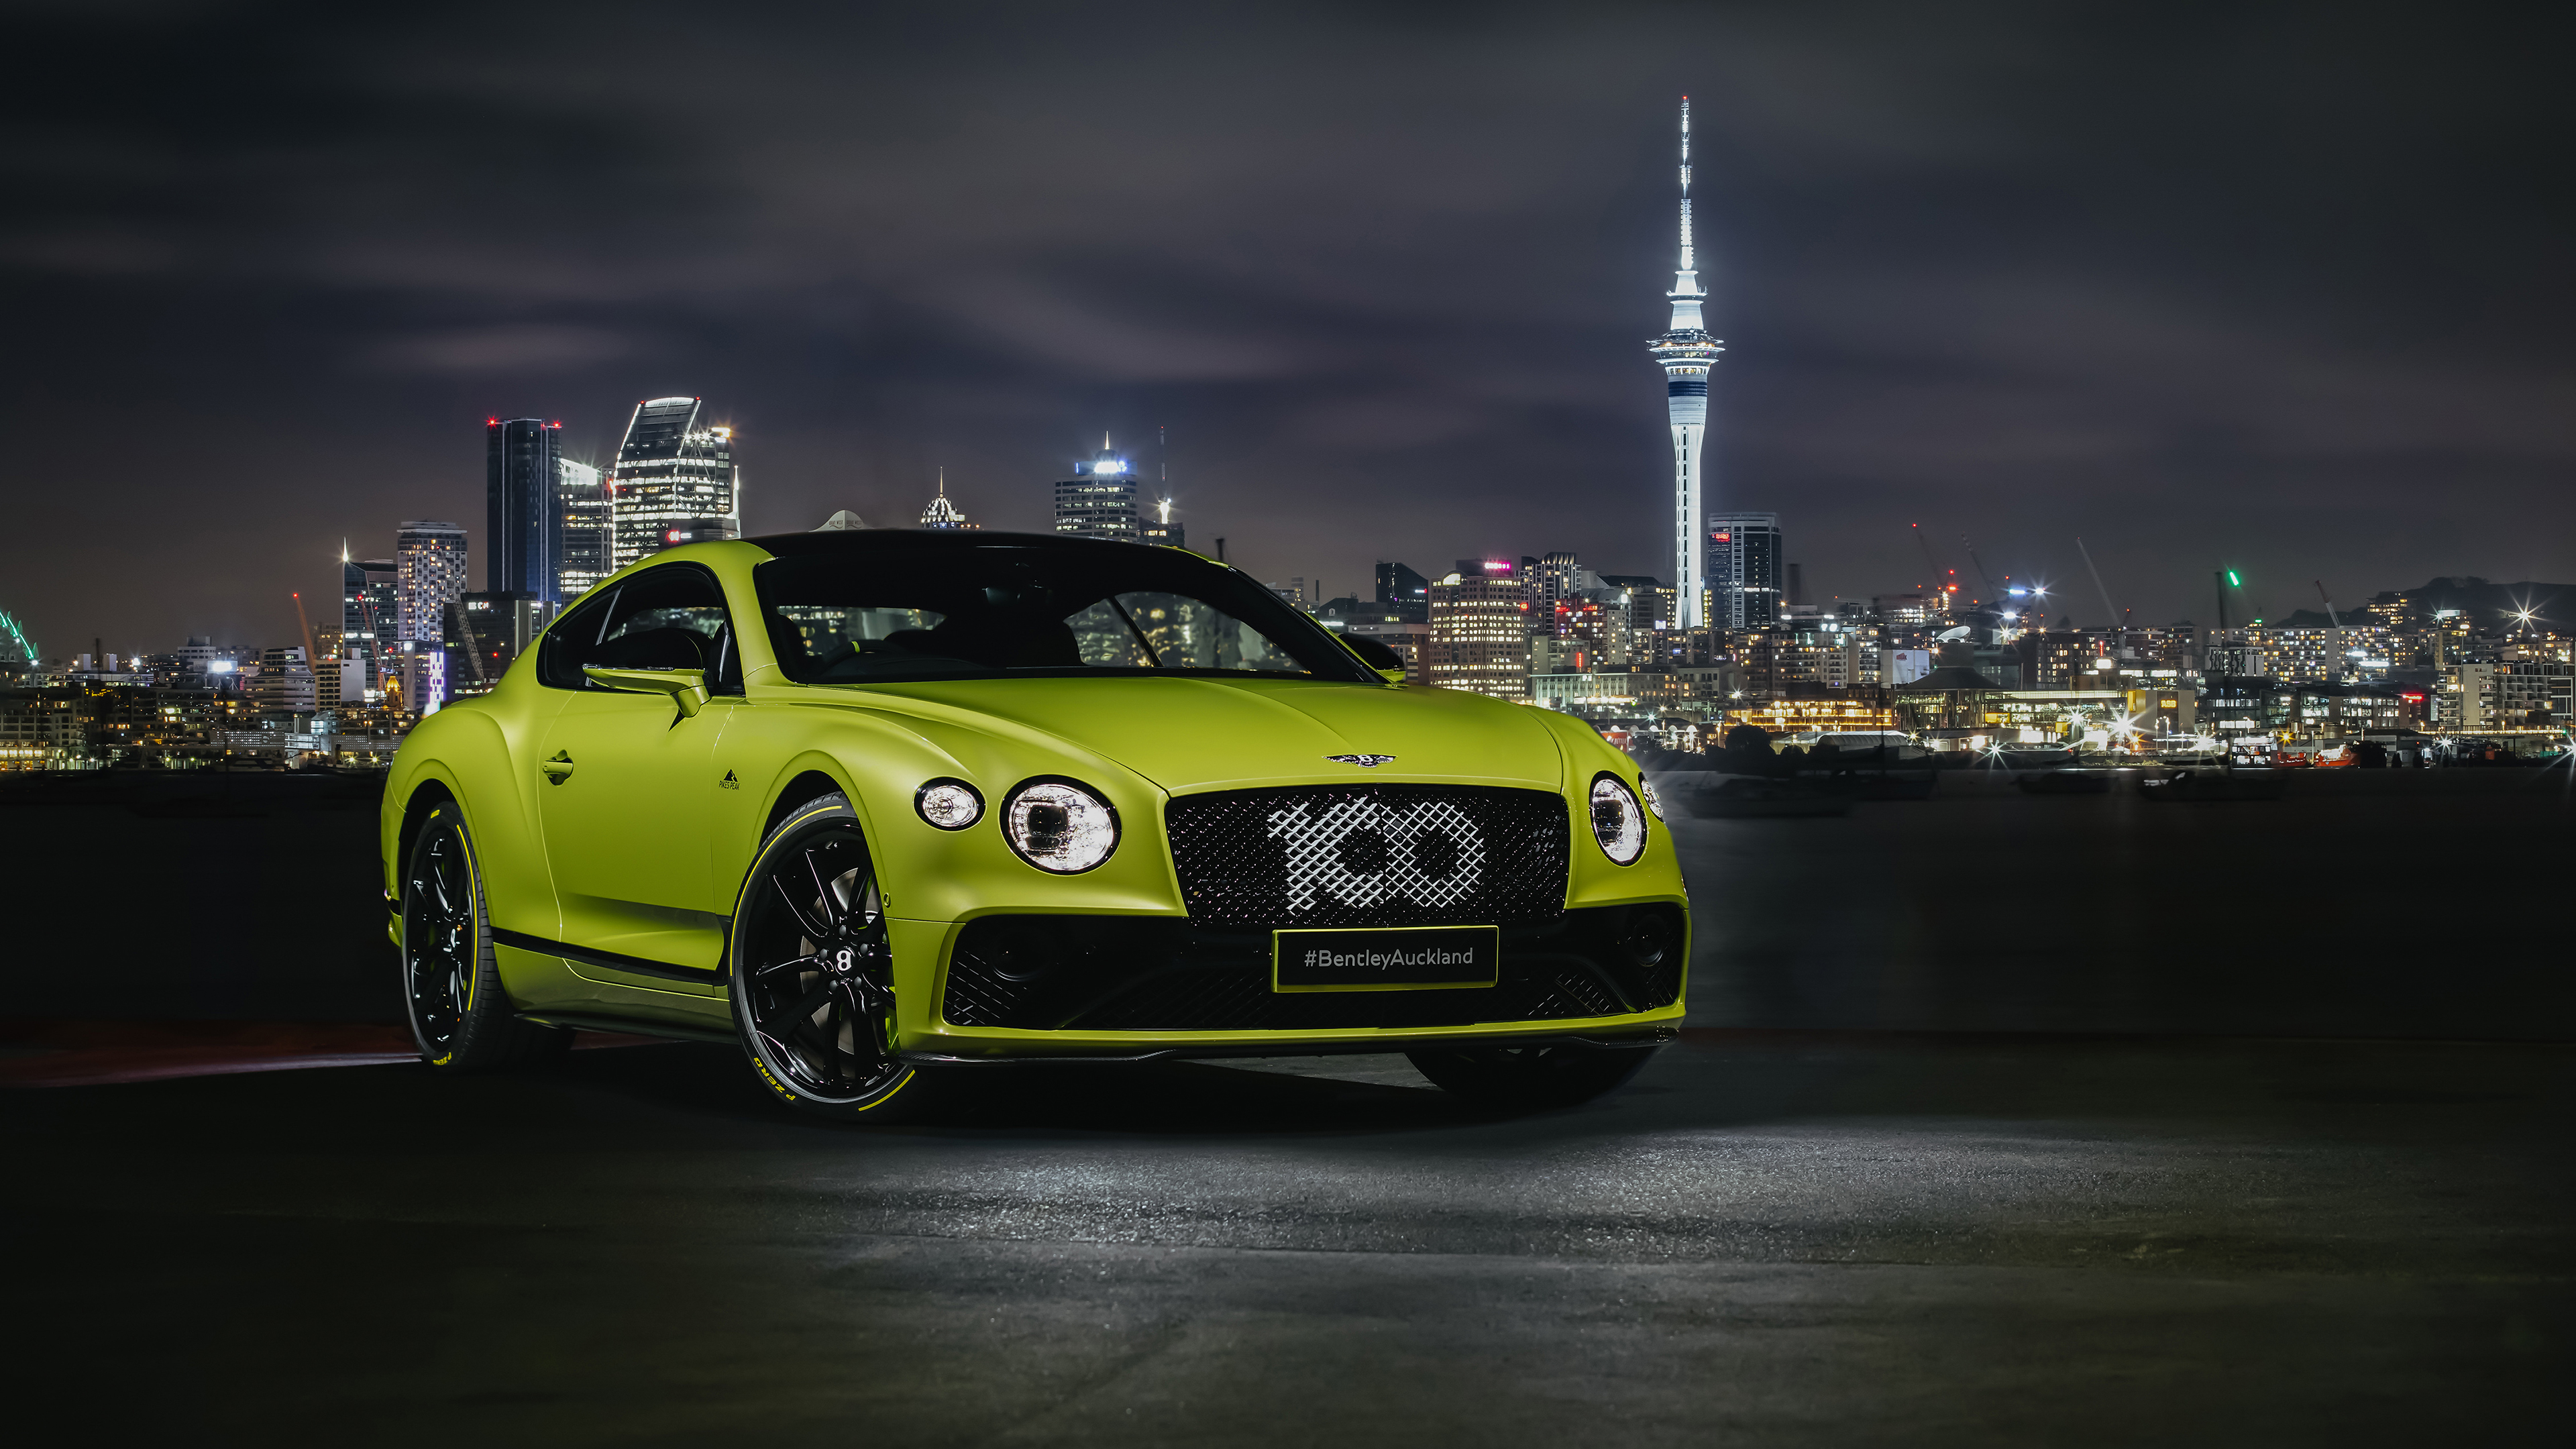 Continental Gt Pictures  Download Free Images on Unsplash